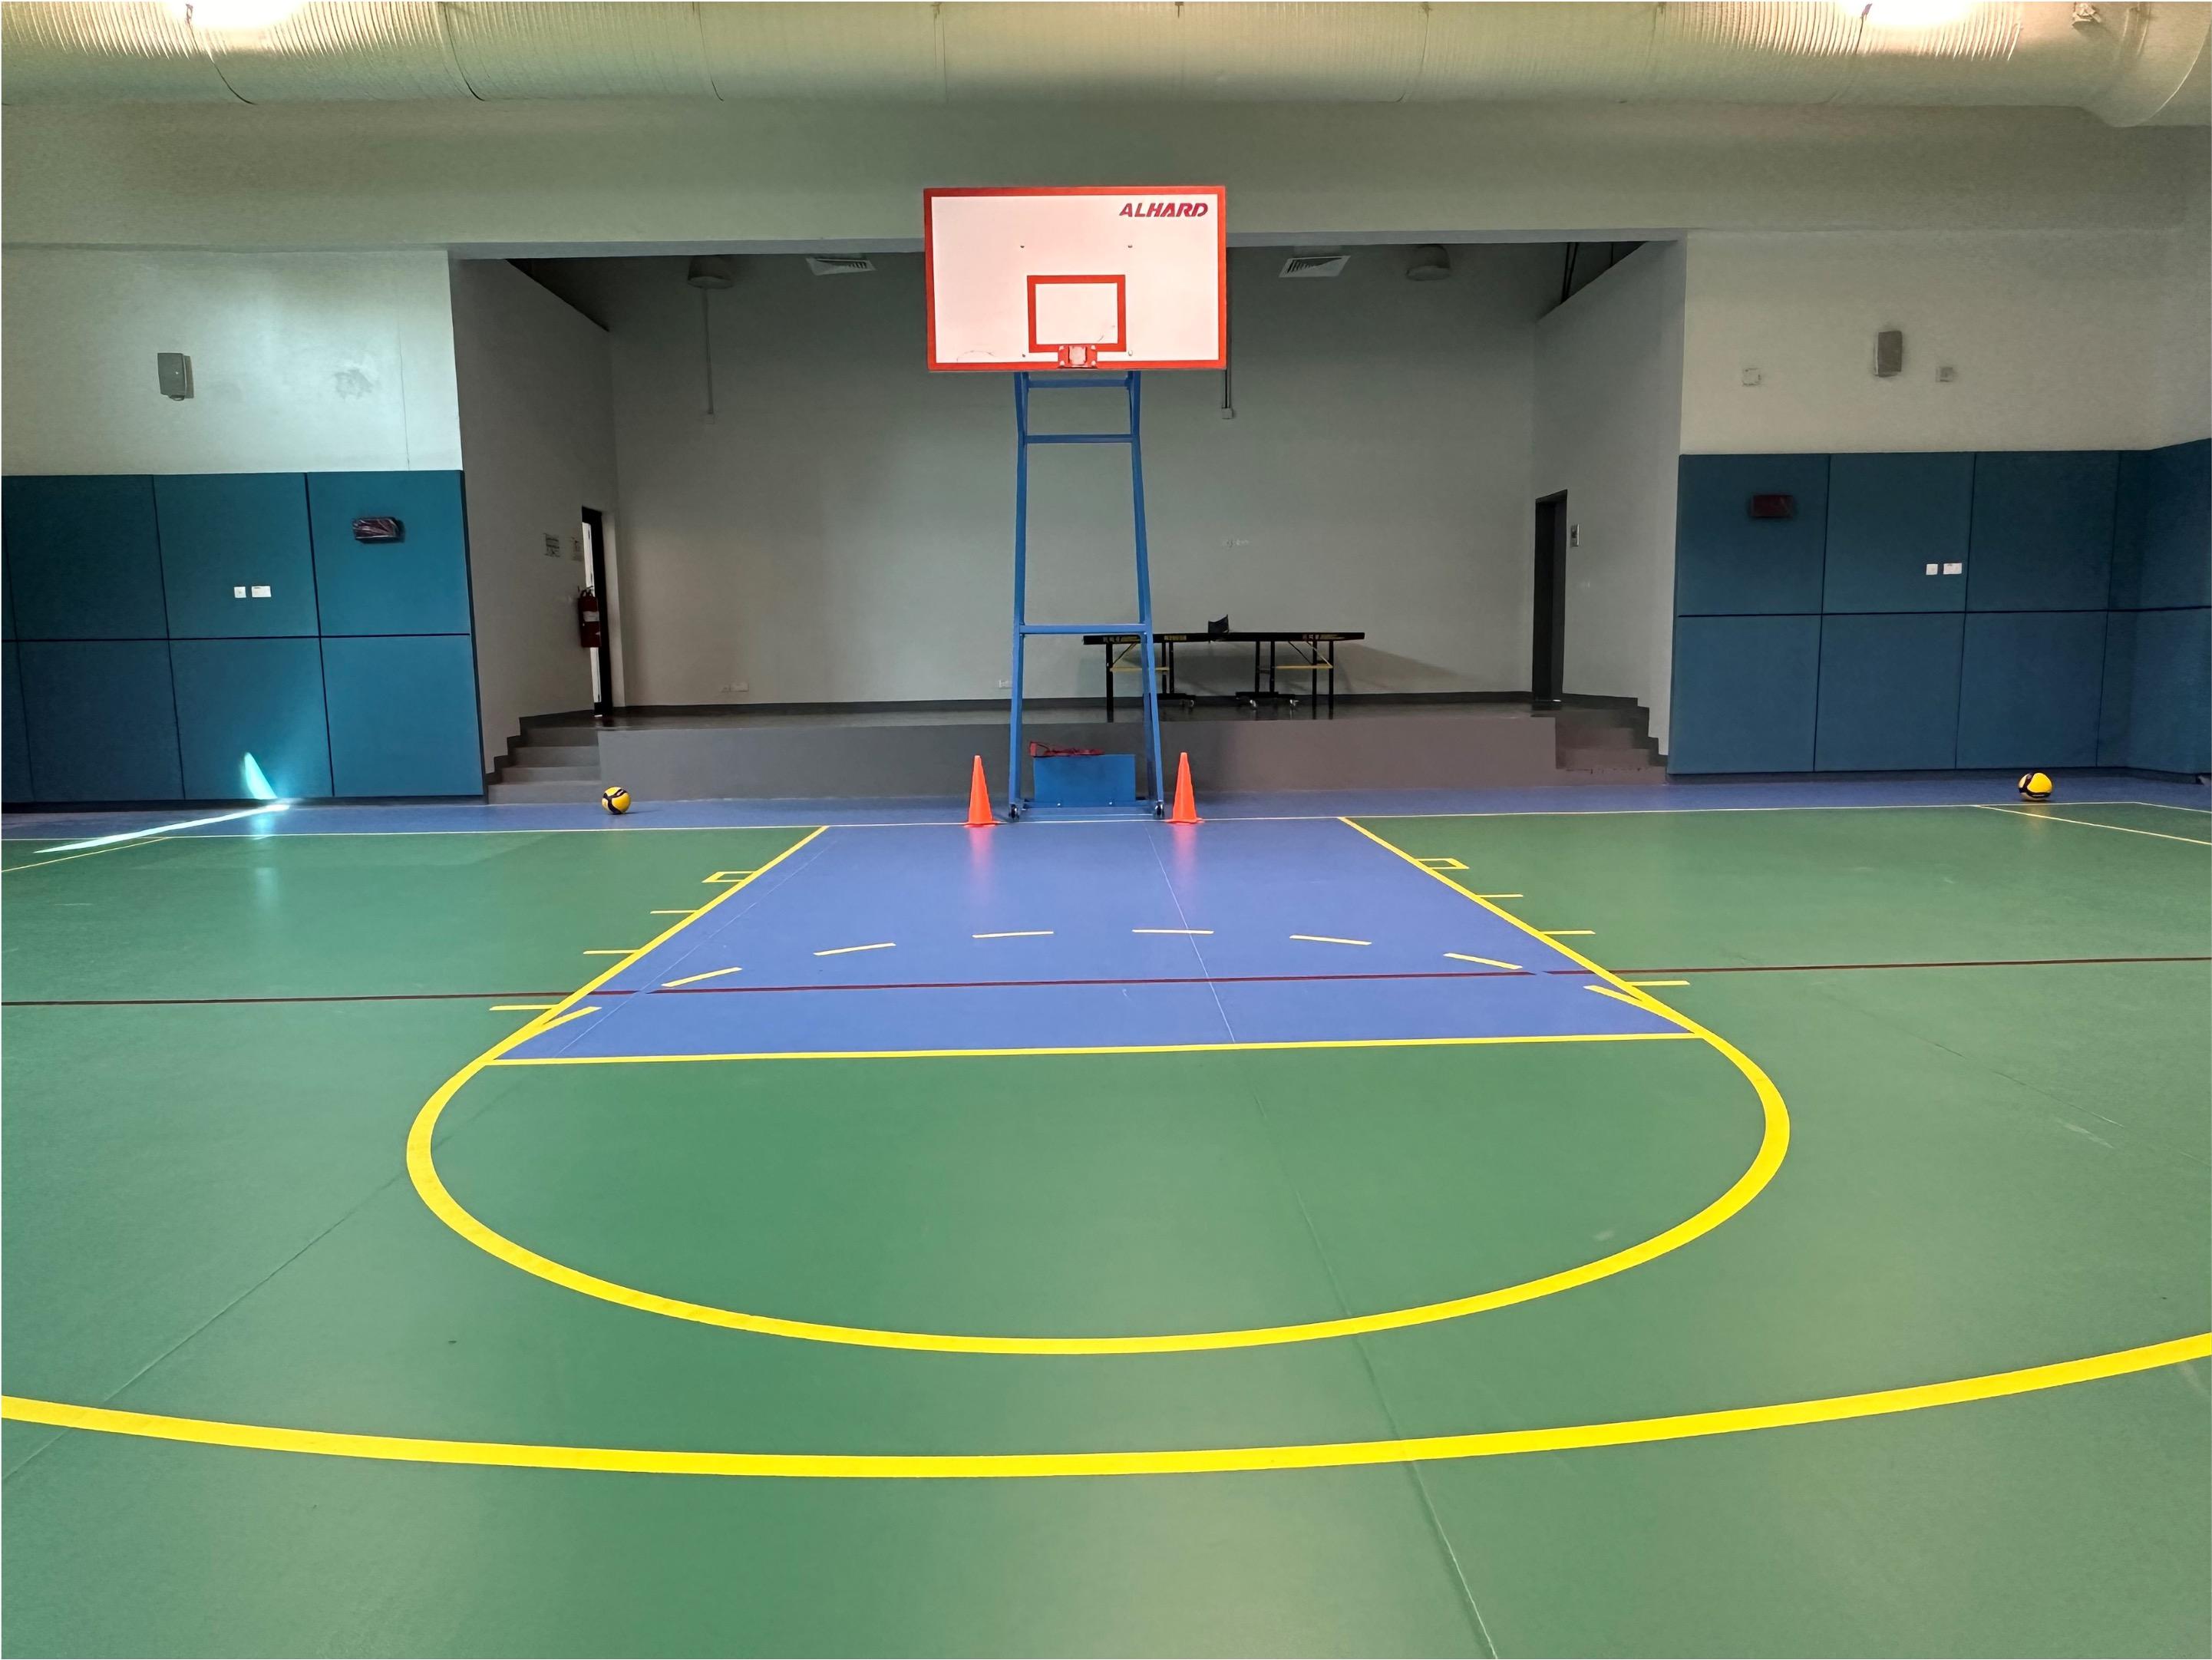 Striped floor for multiple sports activities, basketball base, tennis table, vinyl walls..